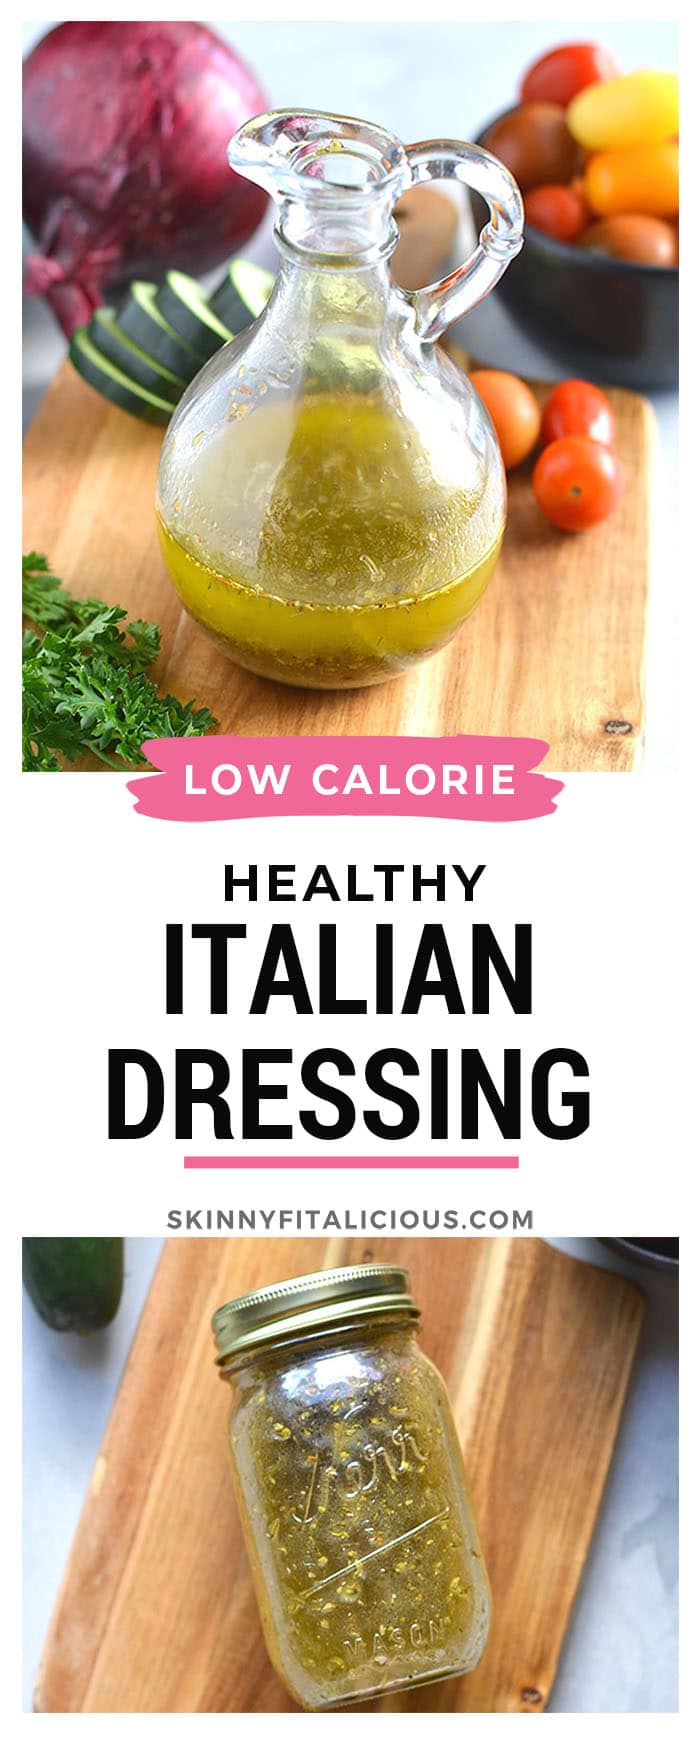 Healthy Italian Dressing is a low calorie, quick and easy salad dressing recipe! Made with Mediterranean ingredients, this healthy dressing is a favorite! Gluten Free + Low Calorie + Low Carb